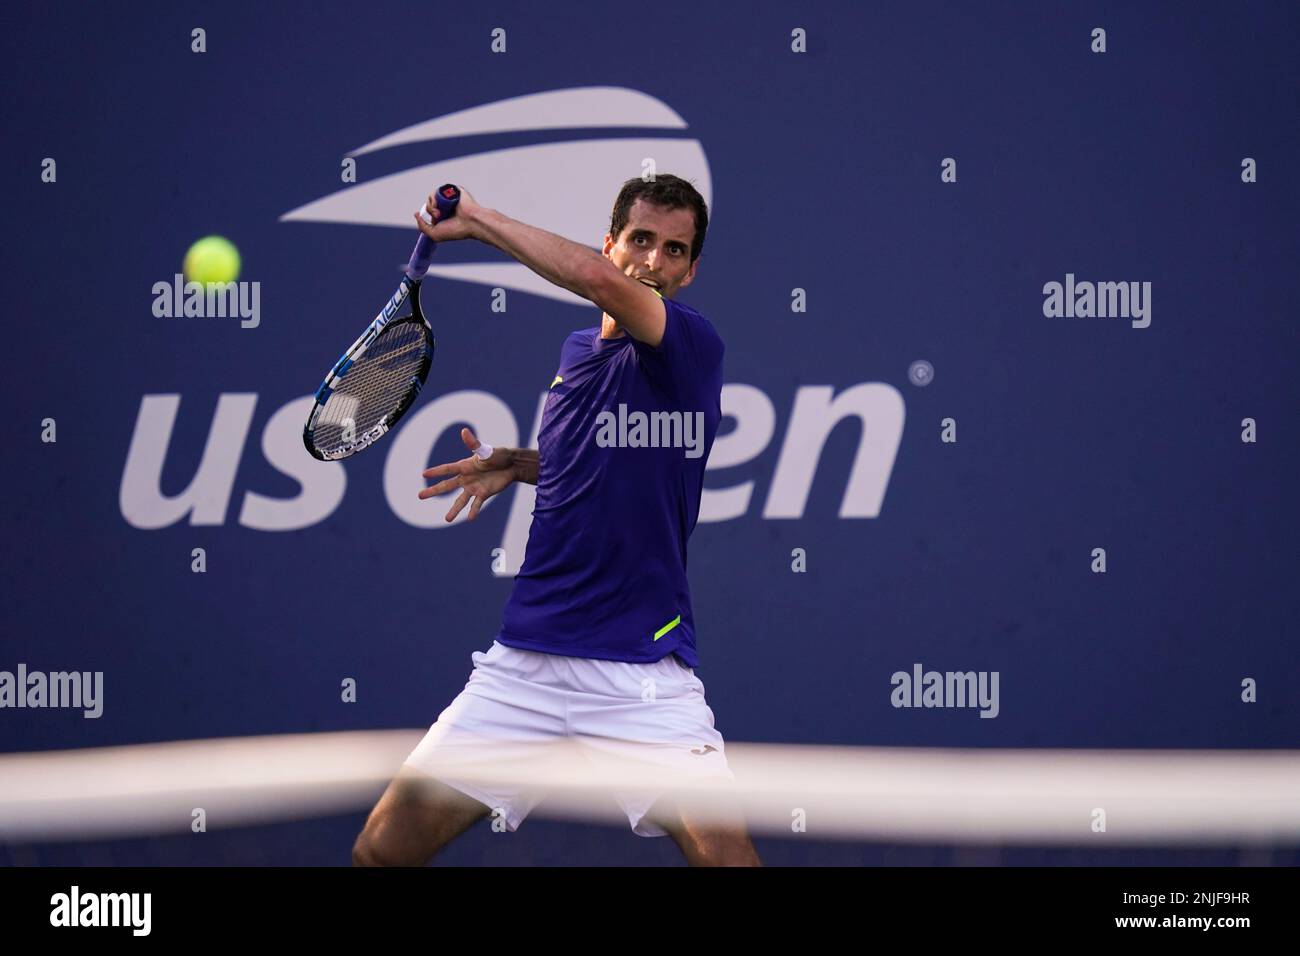 Albert Ramos-Vinolas, of Spain, returns a shot to Norbert Gombos, of Slovakia, during the first round of the US Open tennis championships, Tuesday, Aug